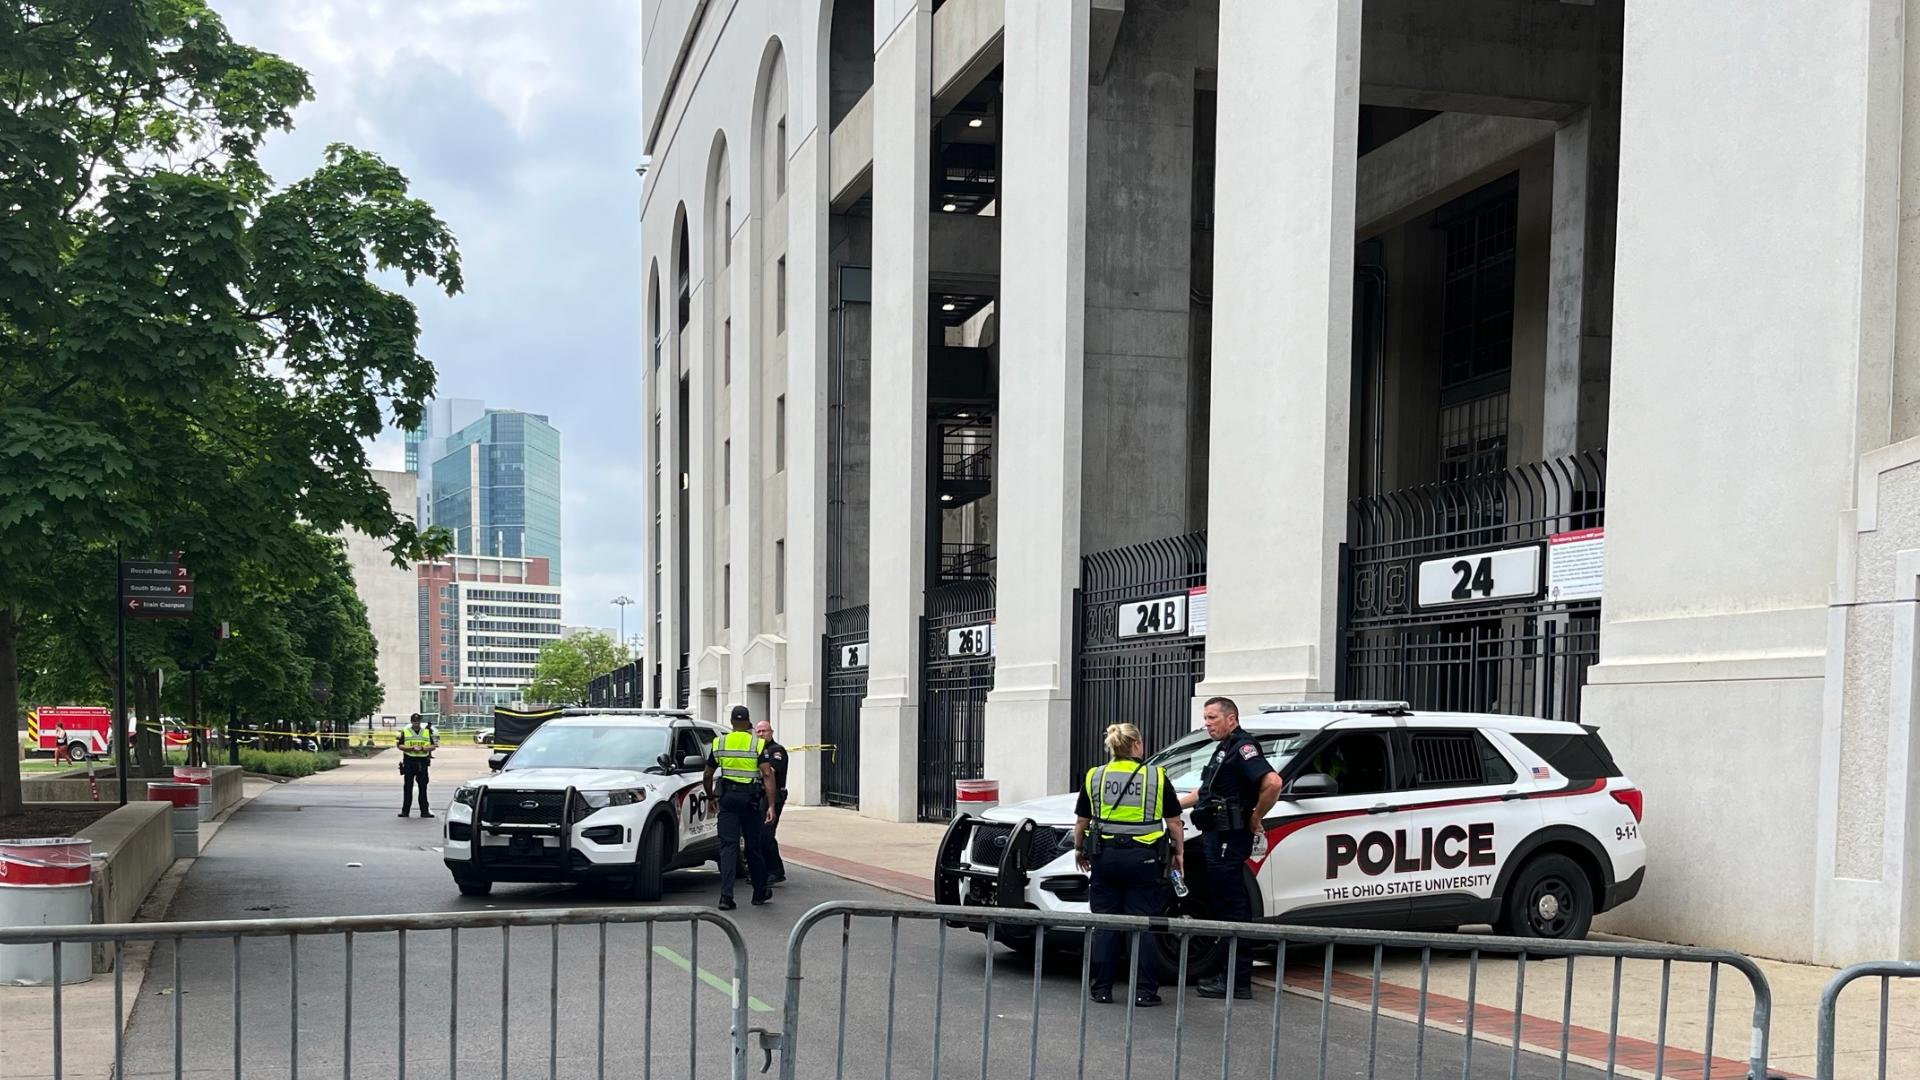 1 dead after falling at Ohio Stadium